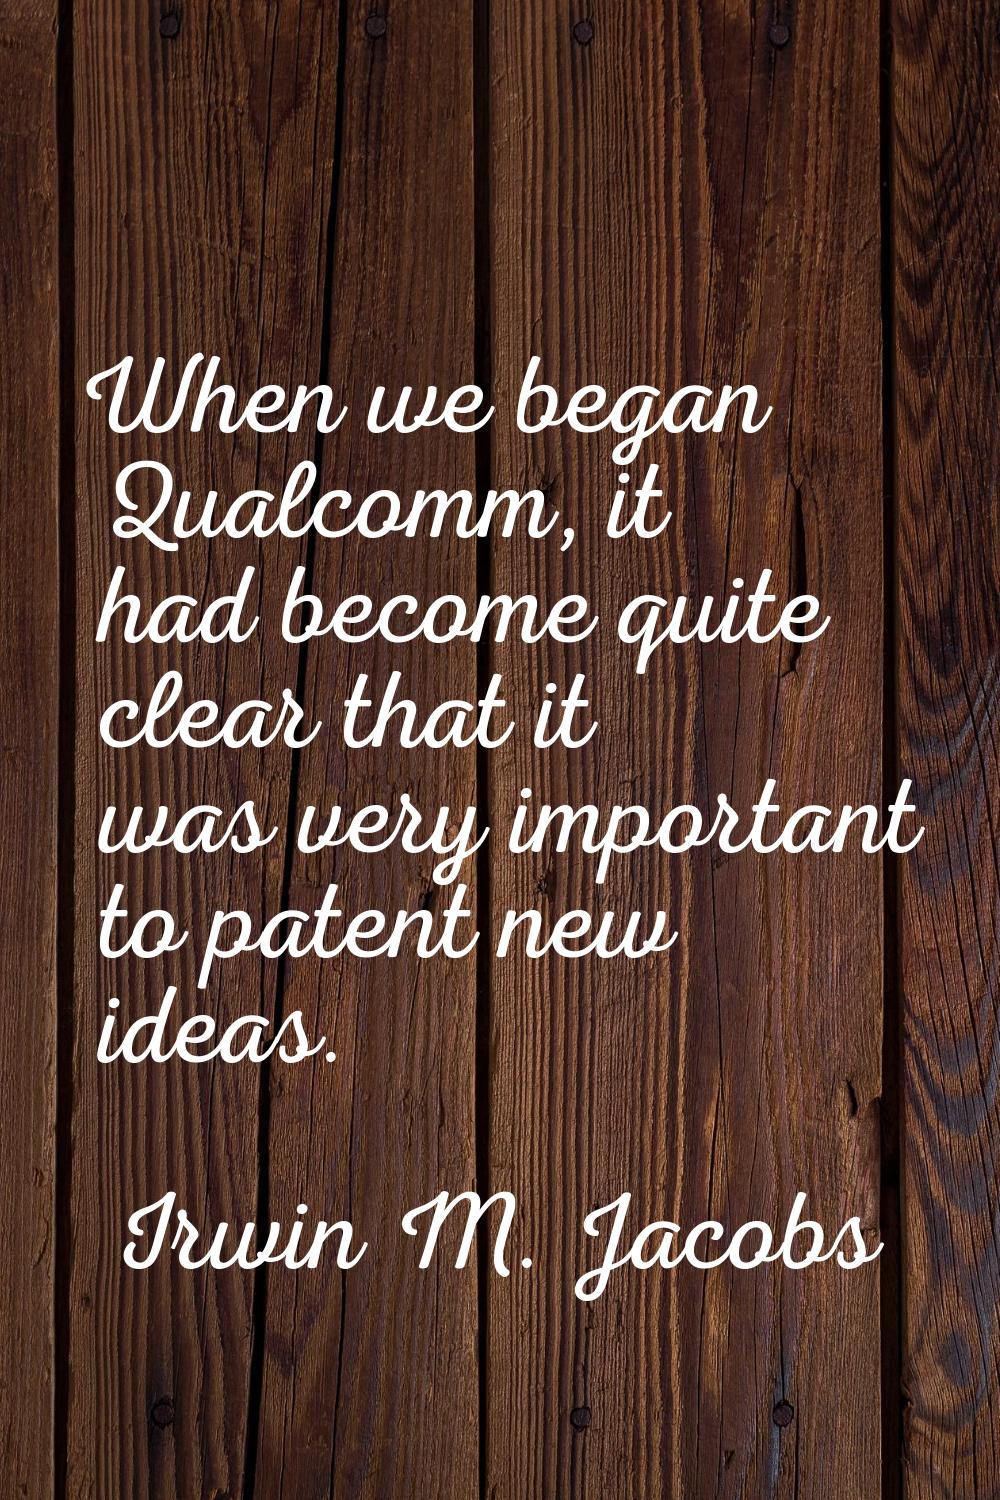 When we began Qualcomm, it had become quite clear that it was very important to patent new ideas.